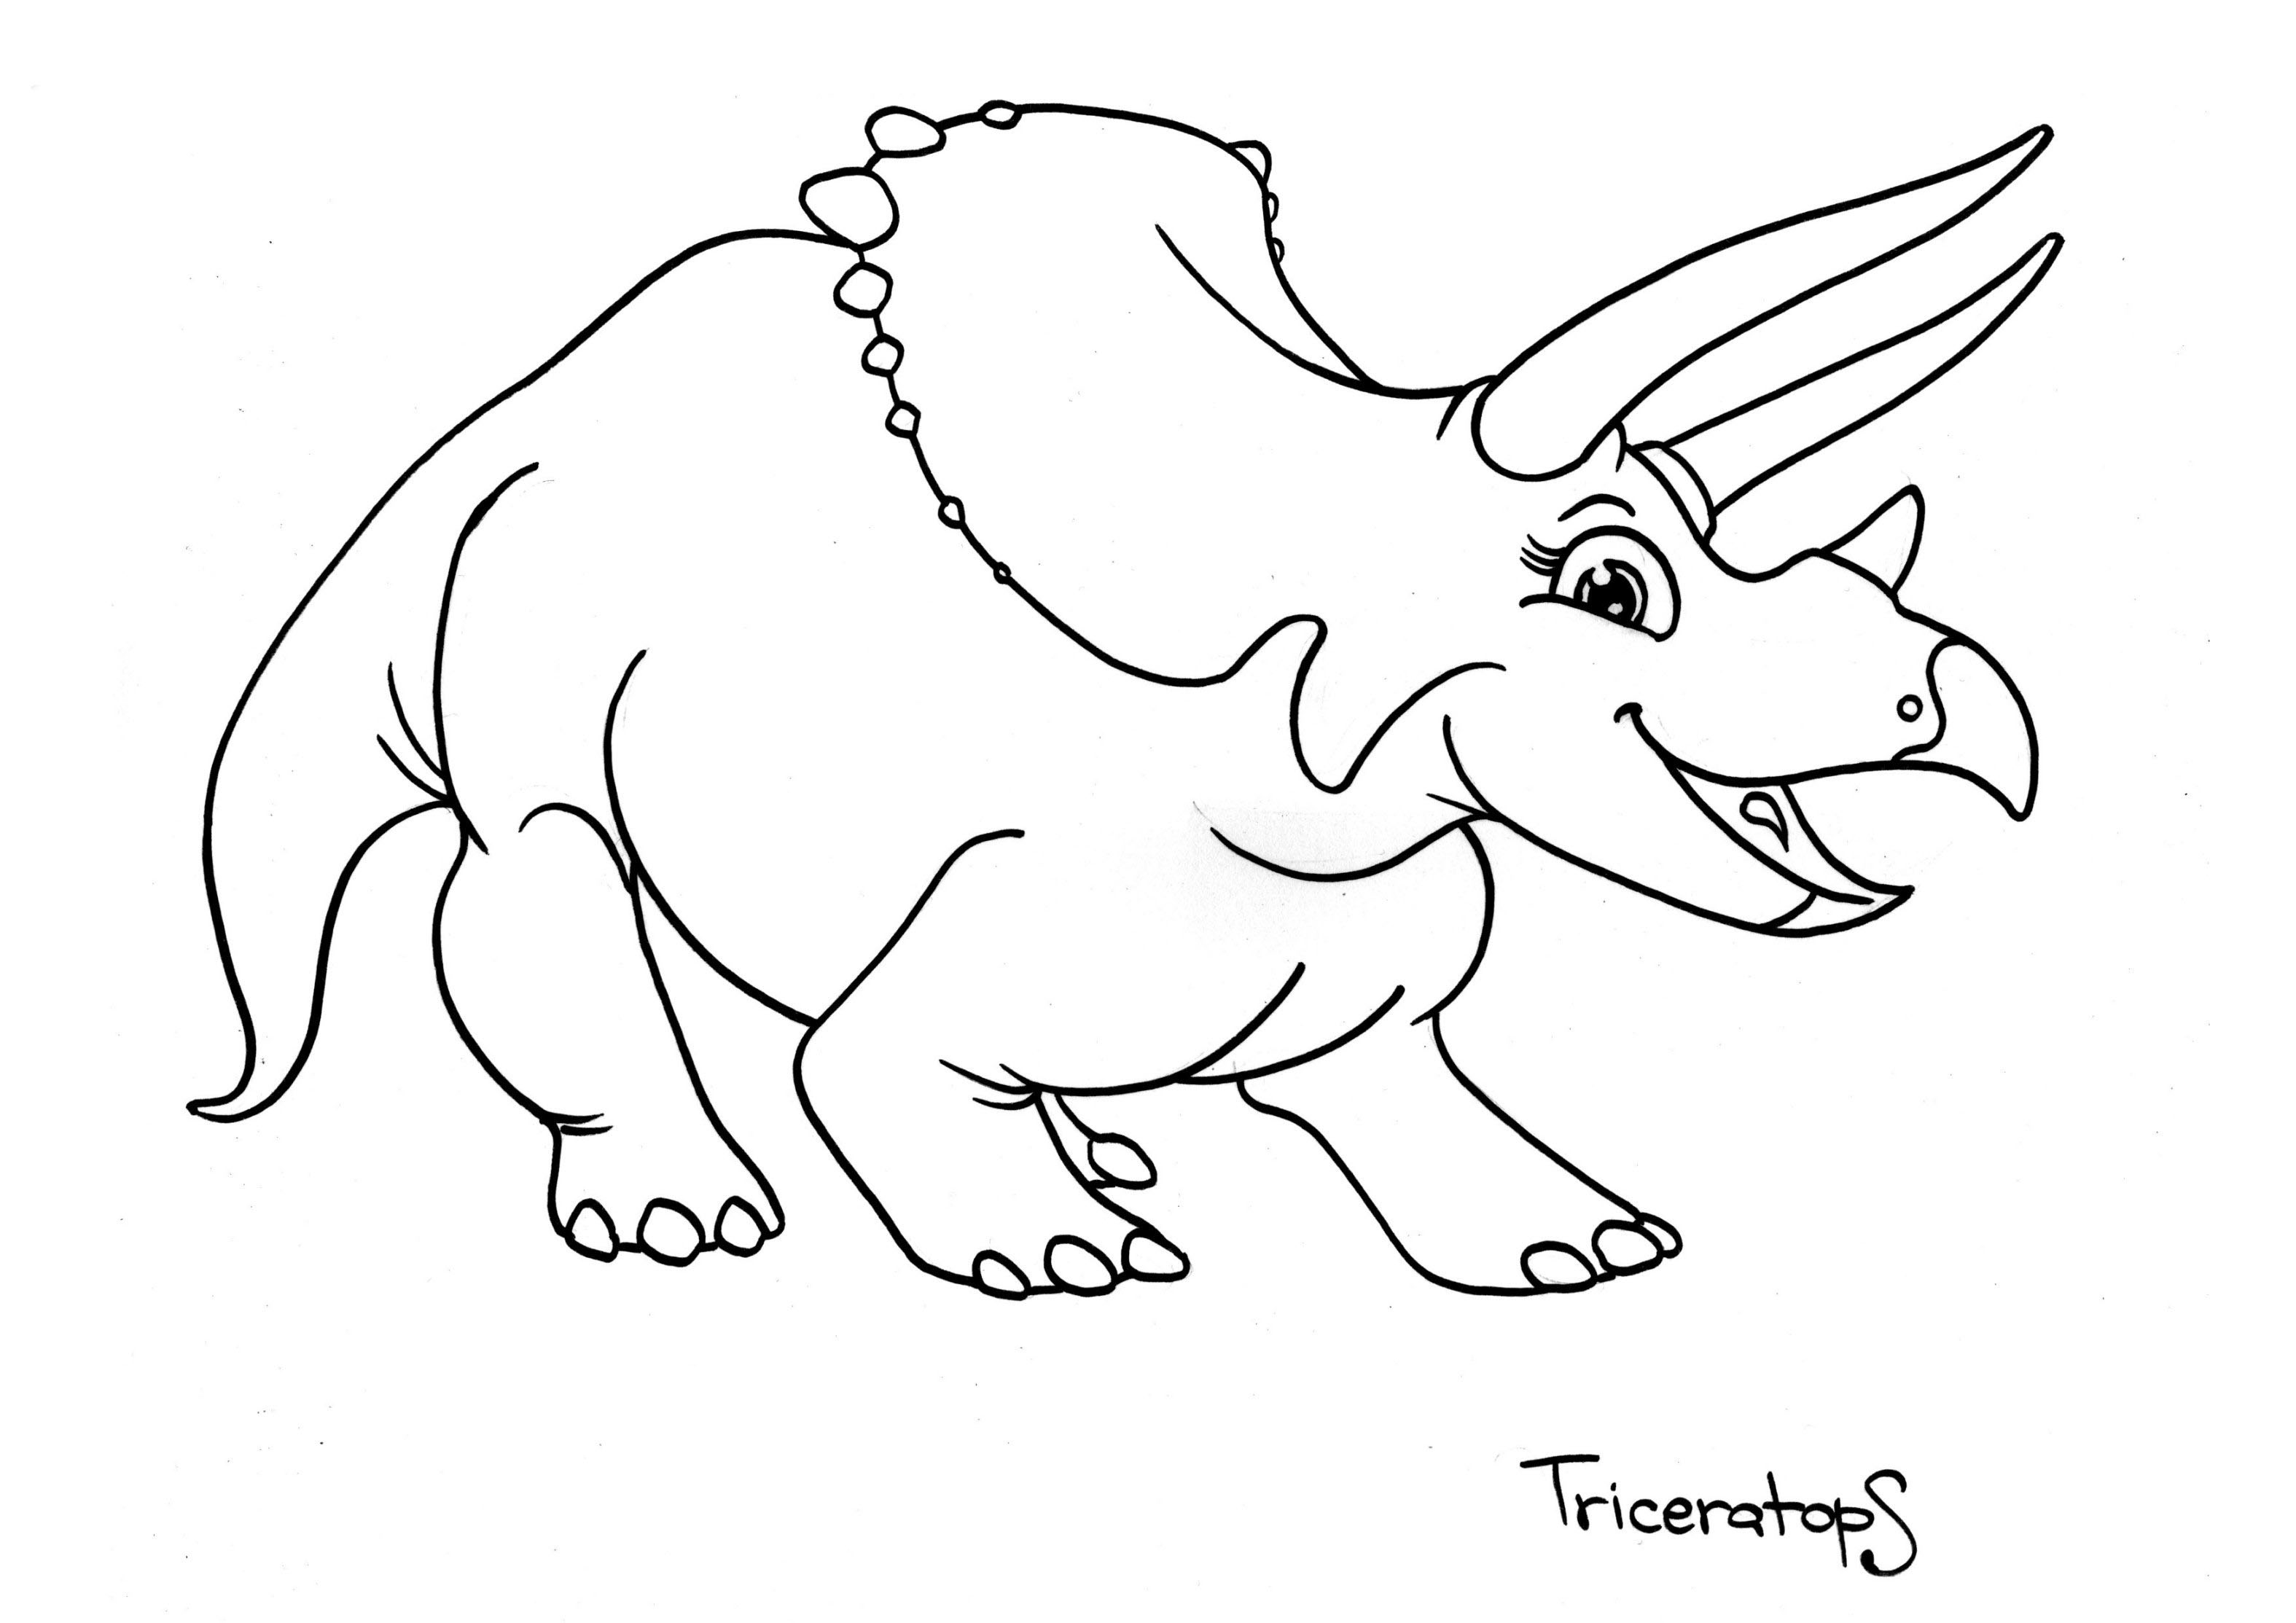 print dinosaur coloring pages dinosaurs coloring pages printable free coloring pages dinosaur coloring pages print 